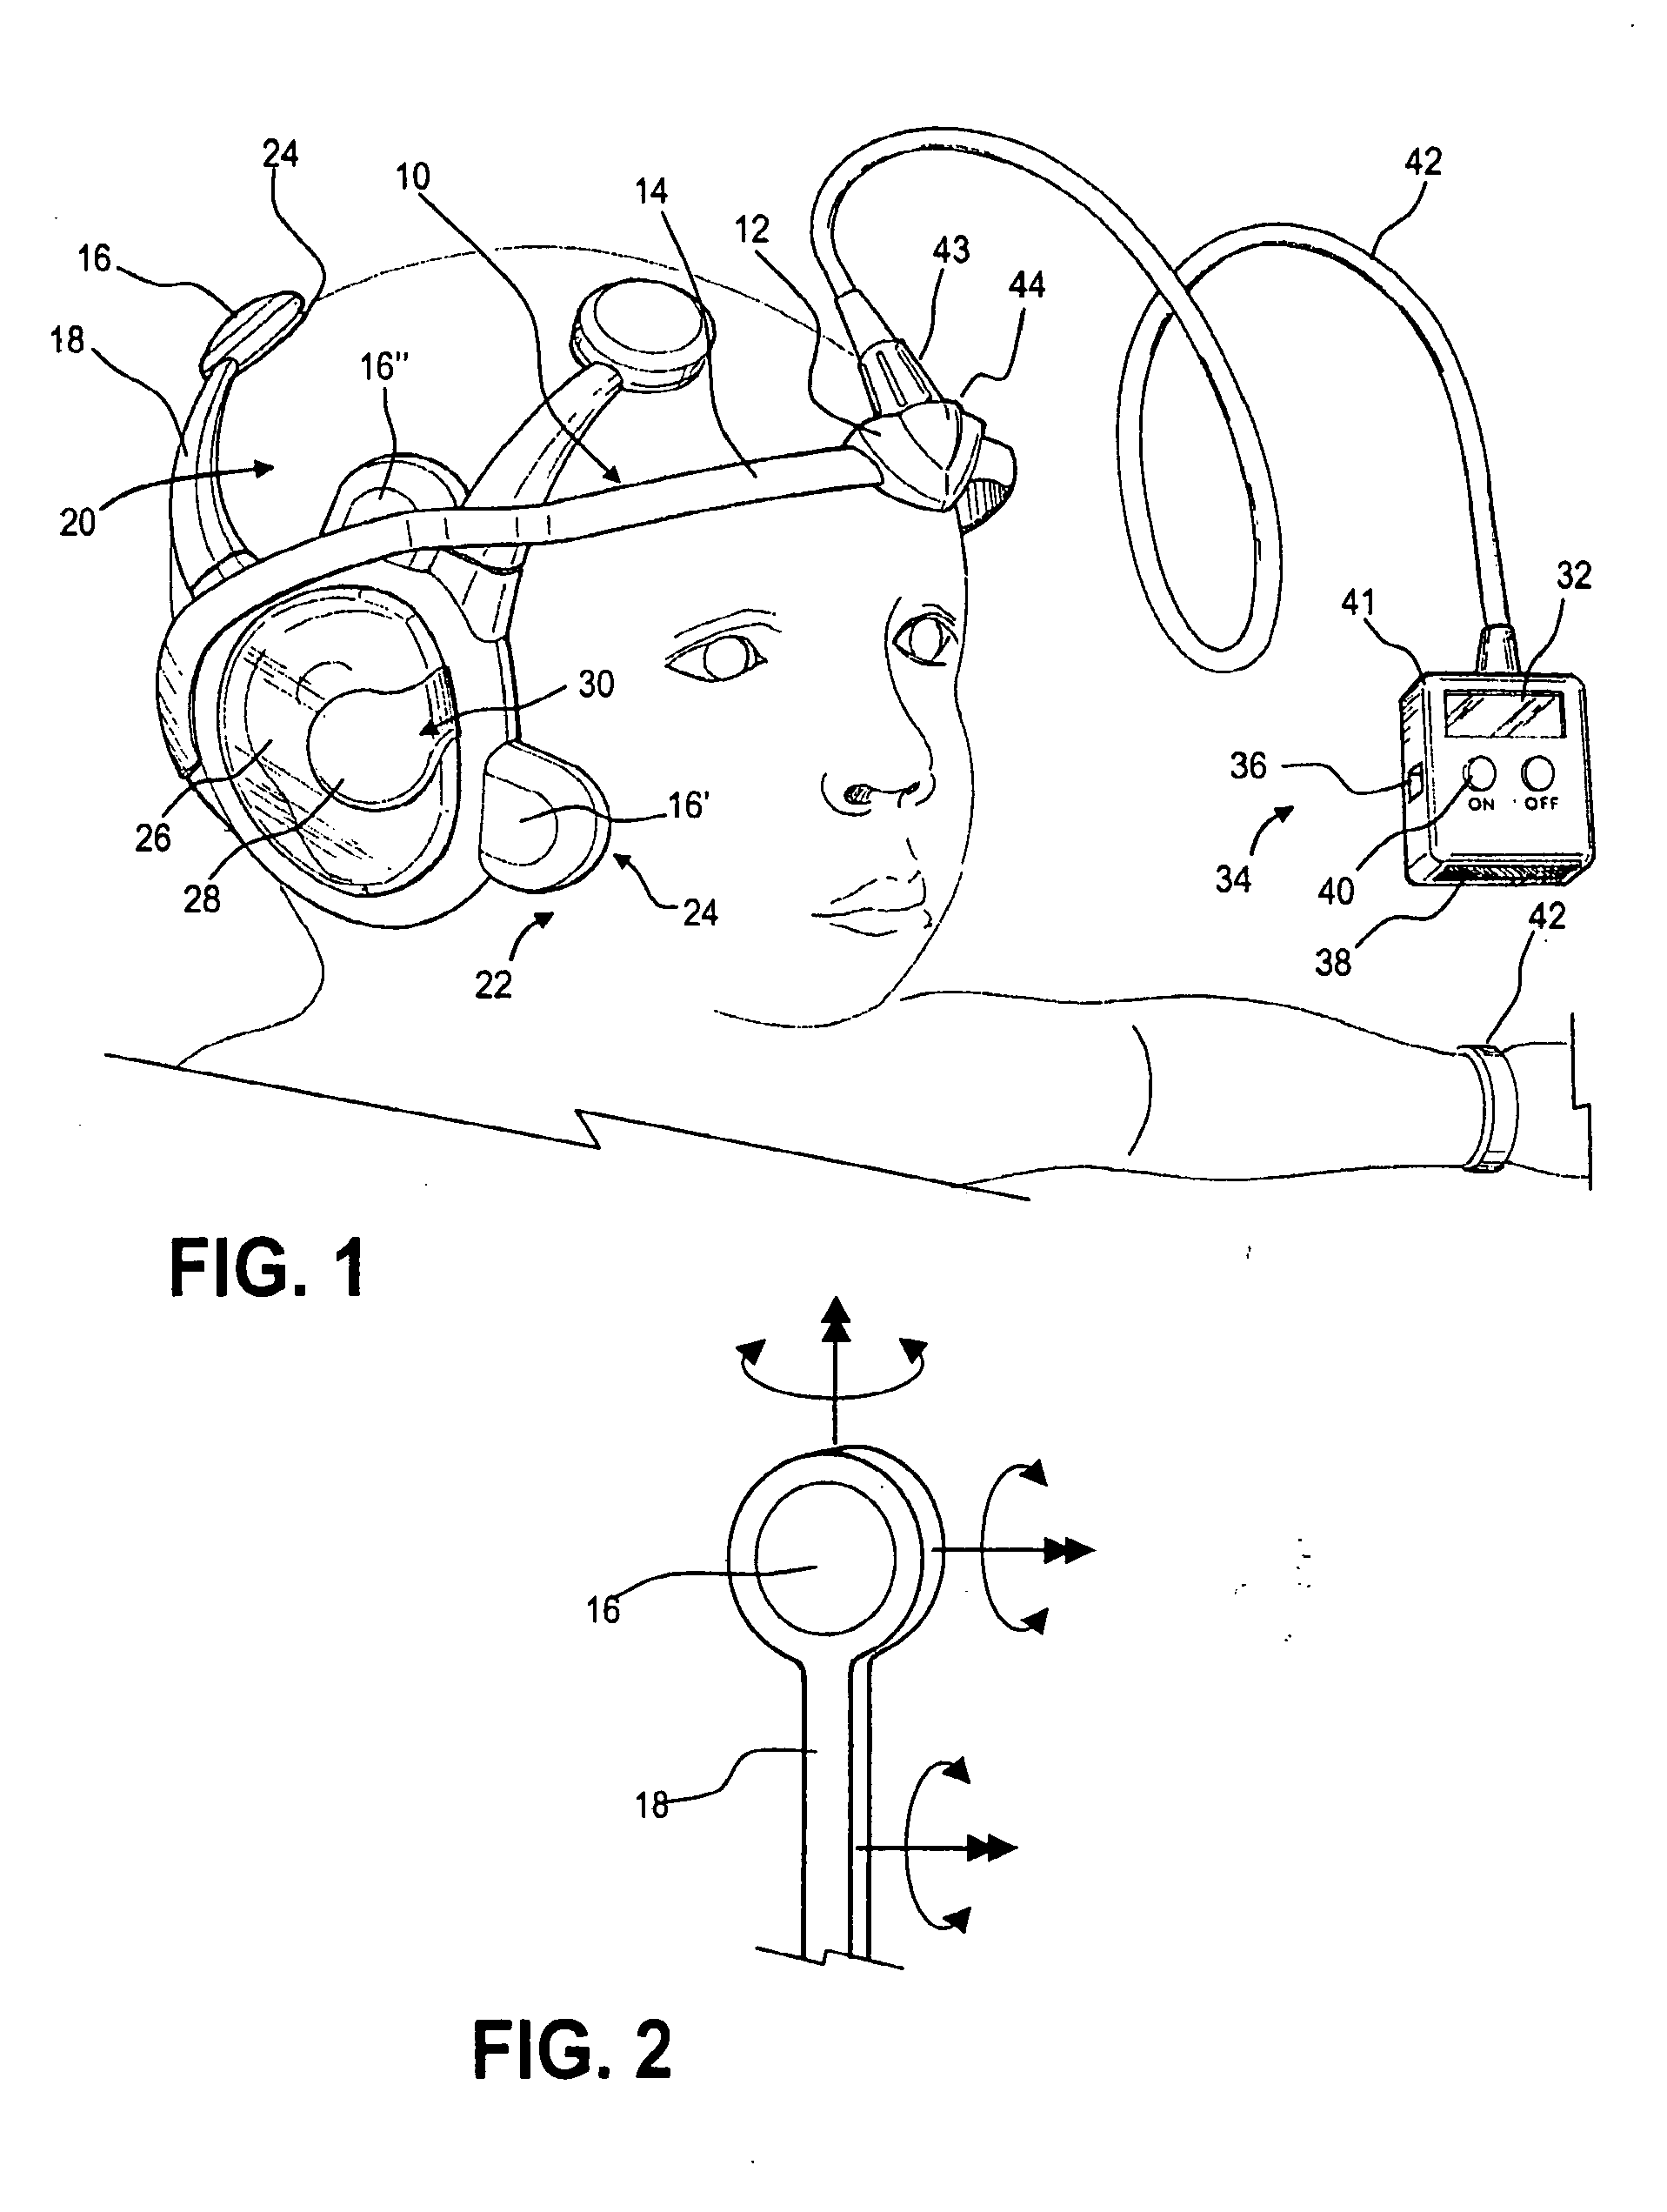 Device and Method for an Automated E.E.G. System for Auditory Evoked Responses